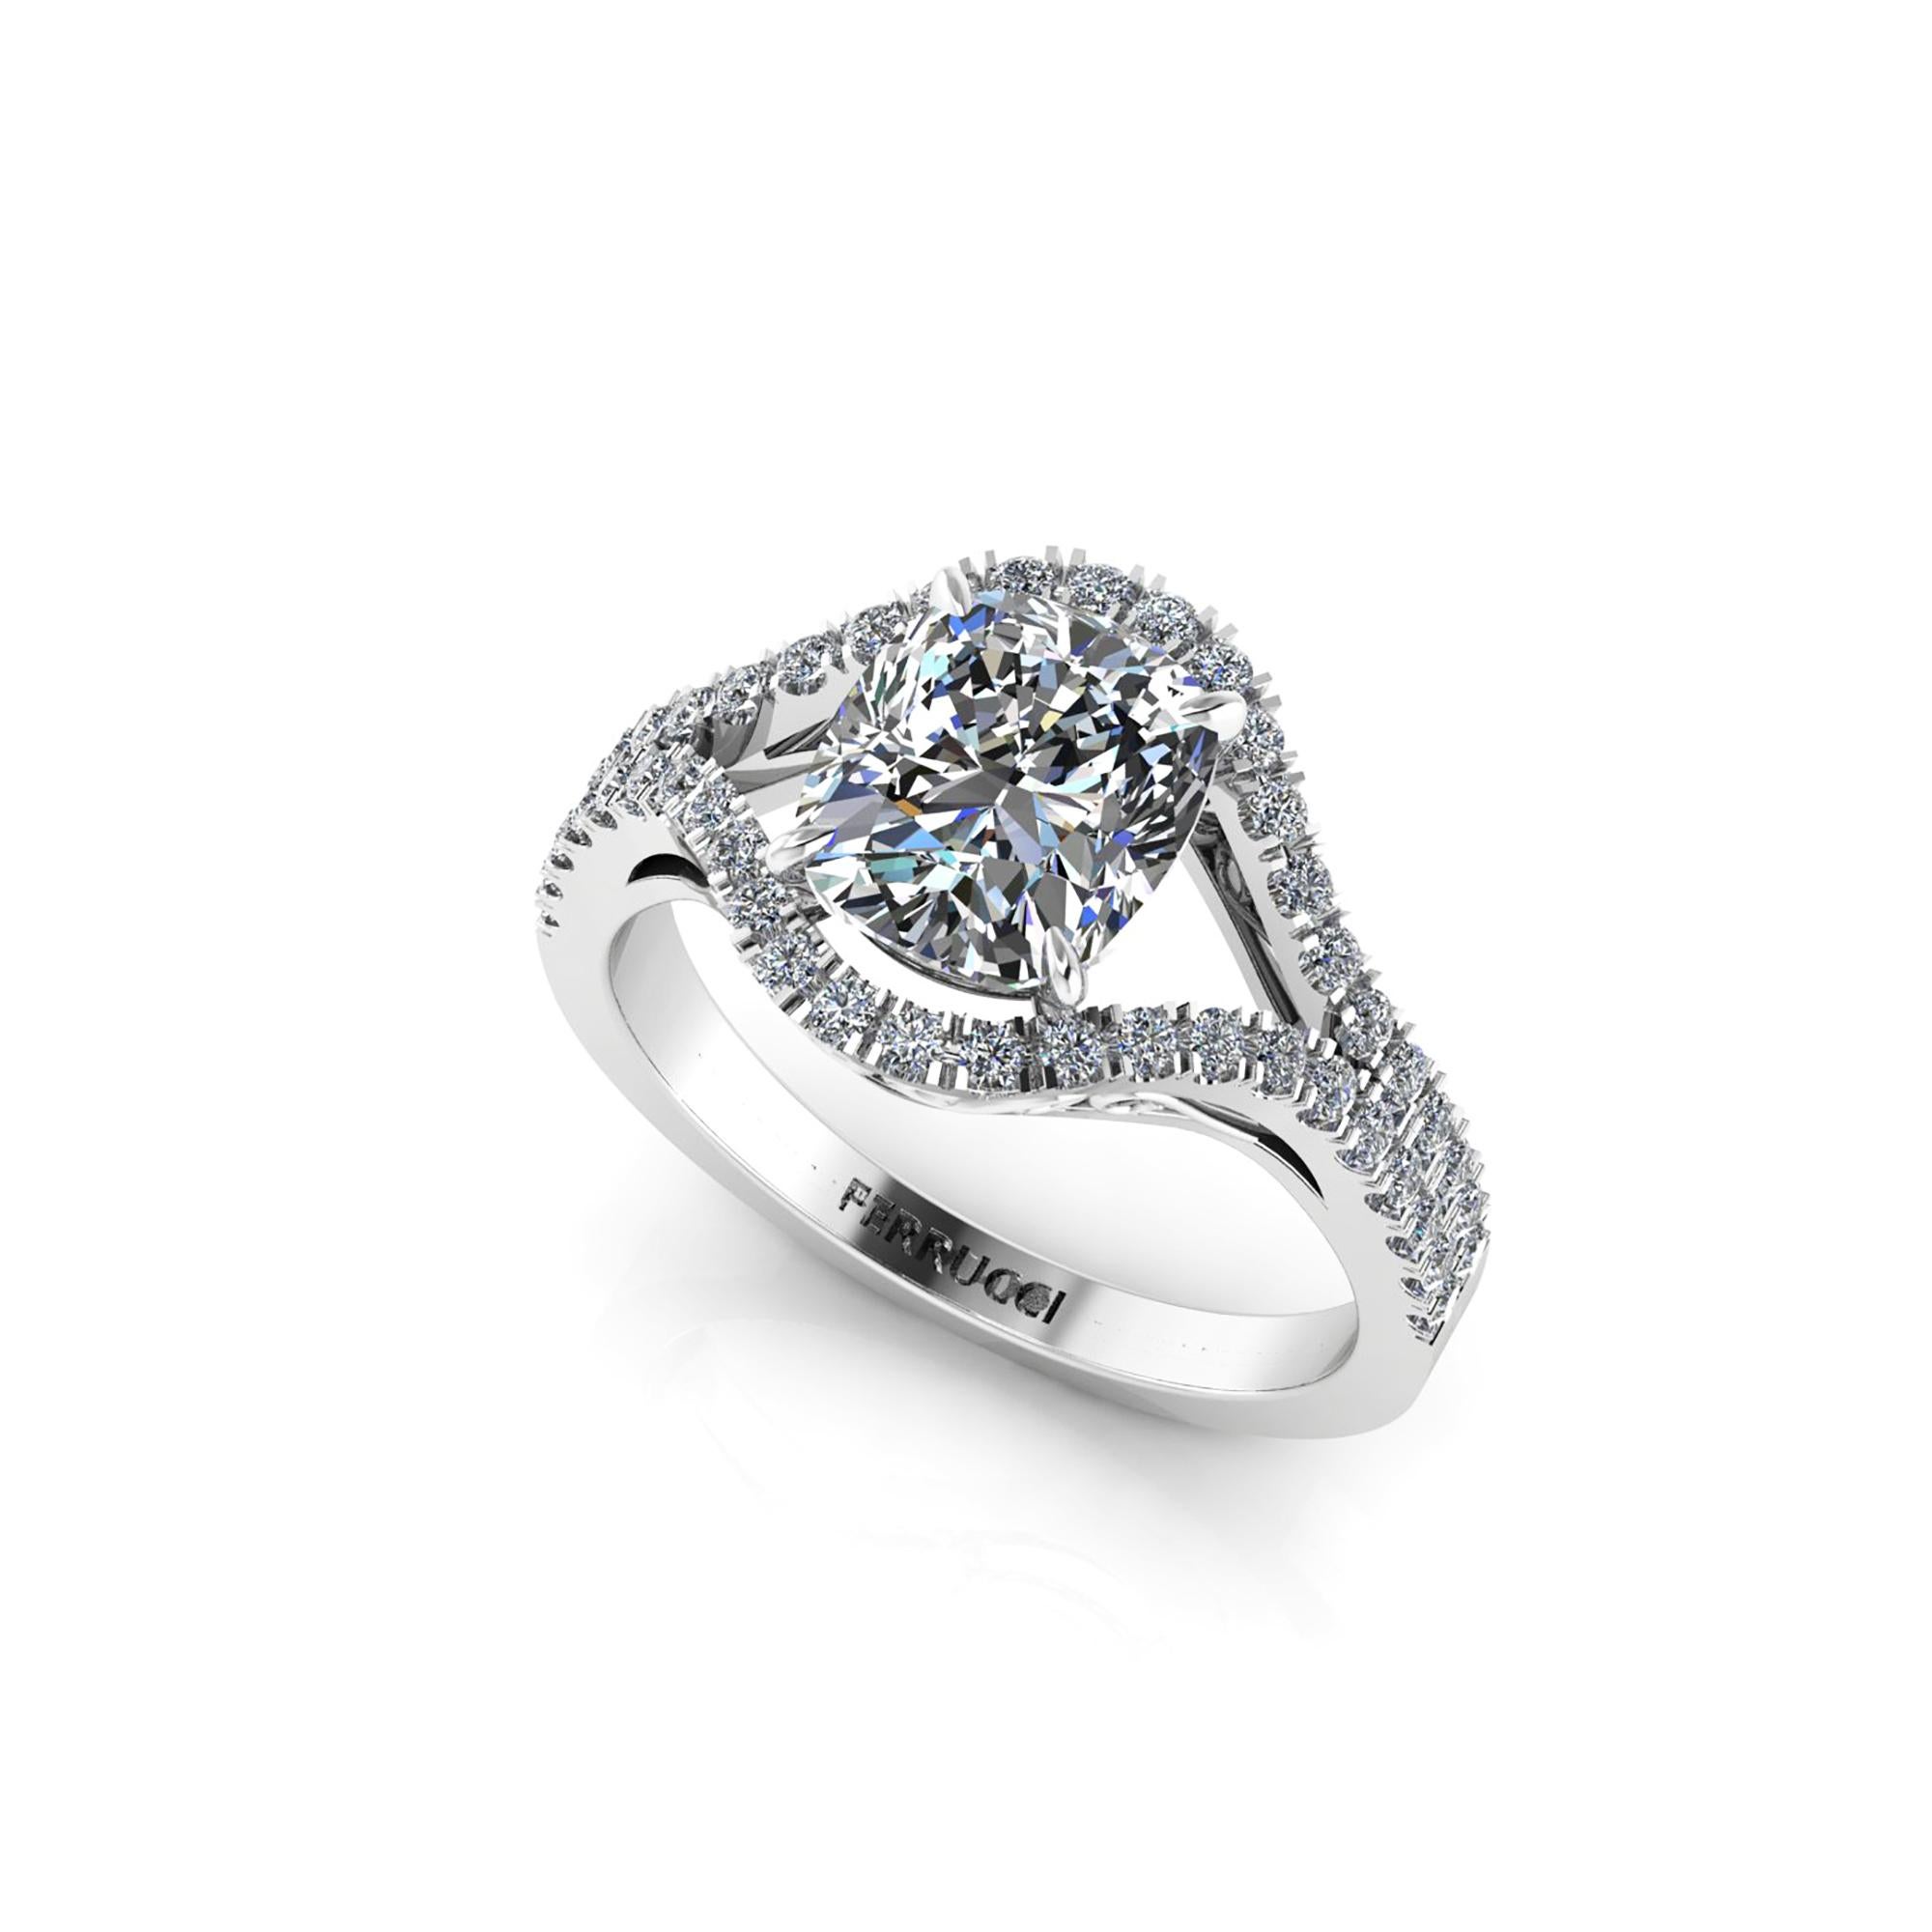 GIA Certified 2.01 carat Cushion diamond set in a split shank, double halo of Diamonds pave set in a 18k white gold ring, with swirls of white gold in a cathedral style.

The ring is size 5.75, we offer complimentary sizing upon order